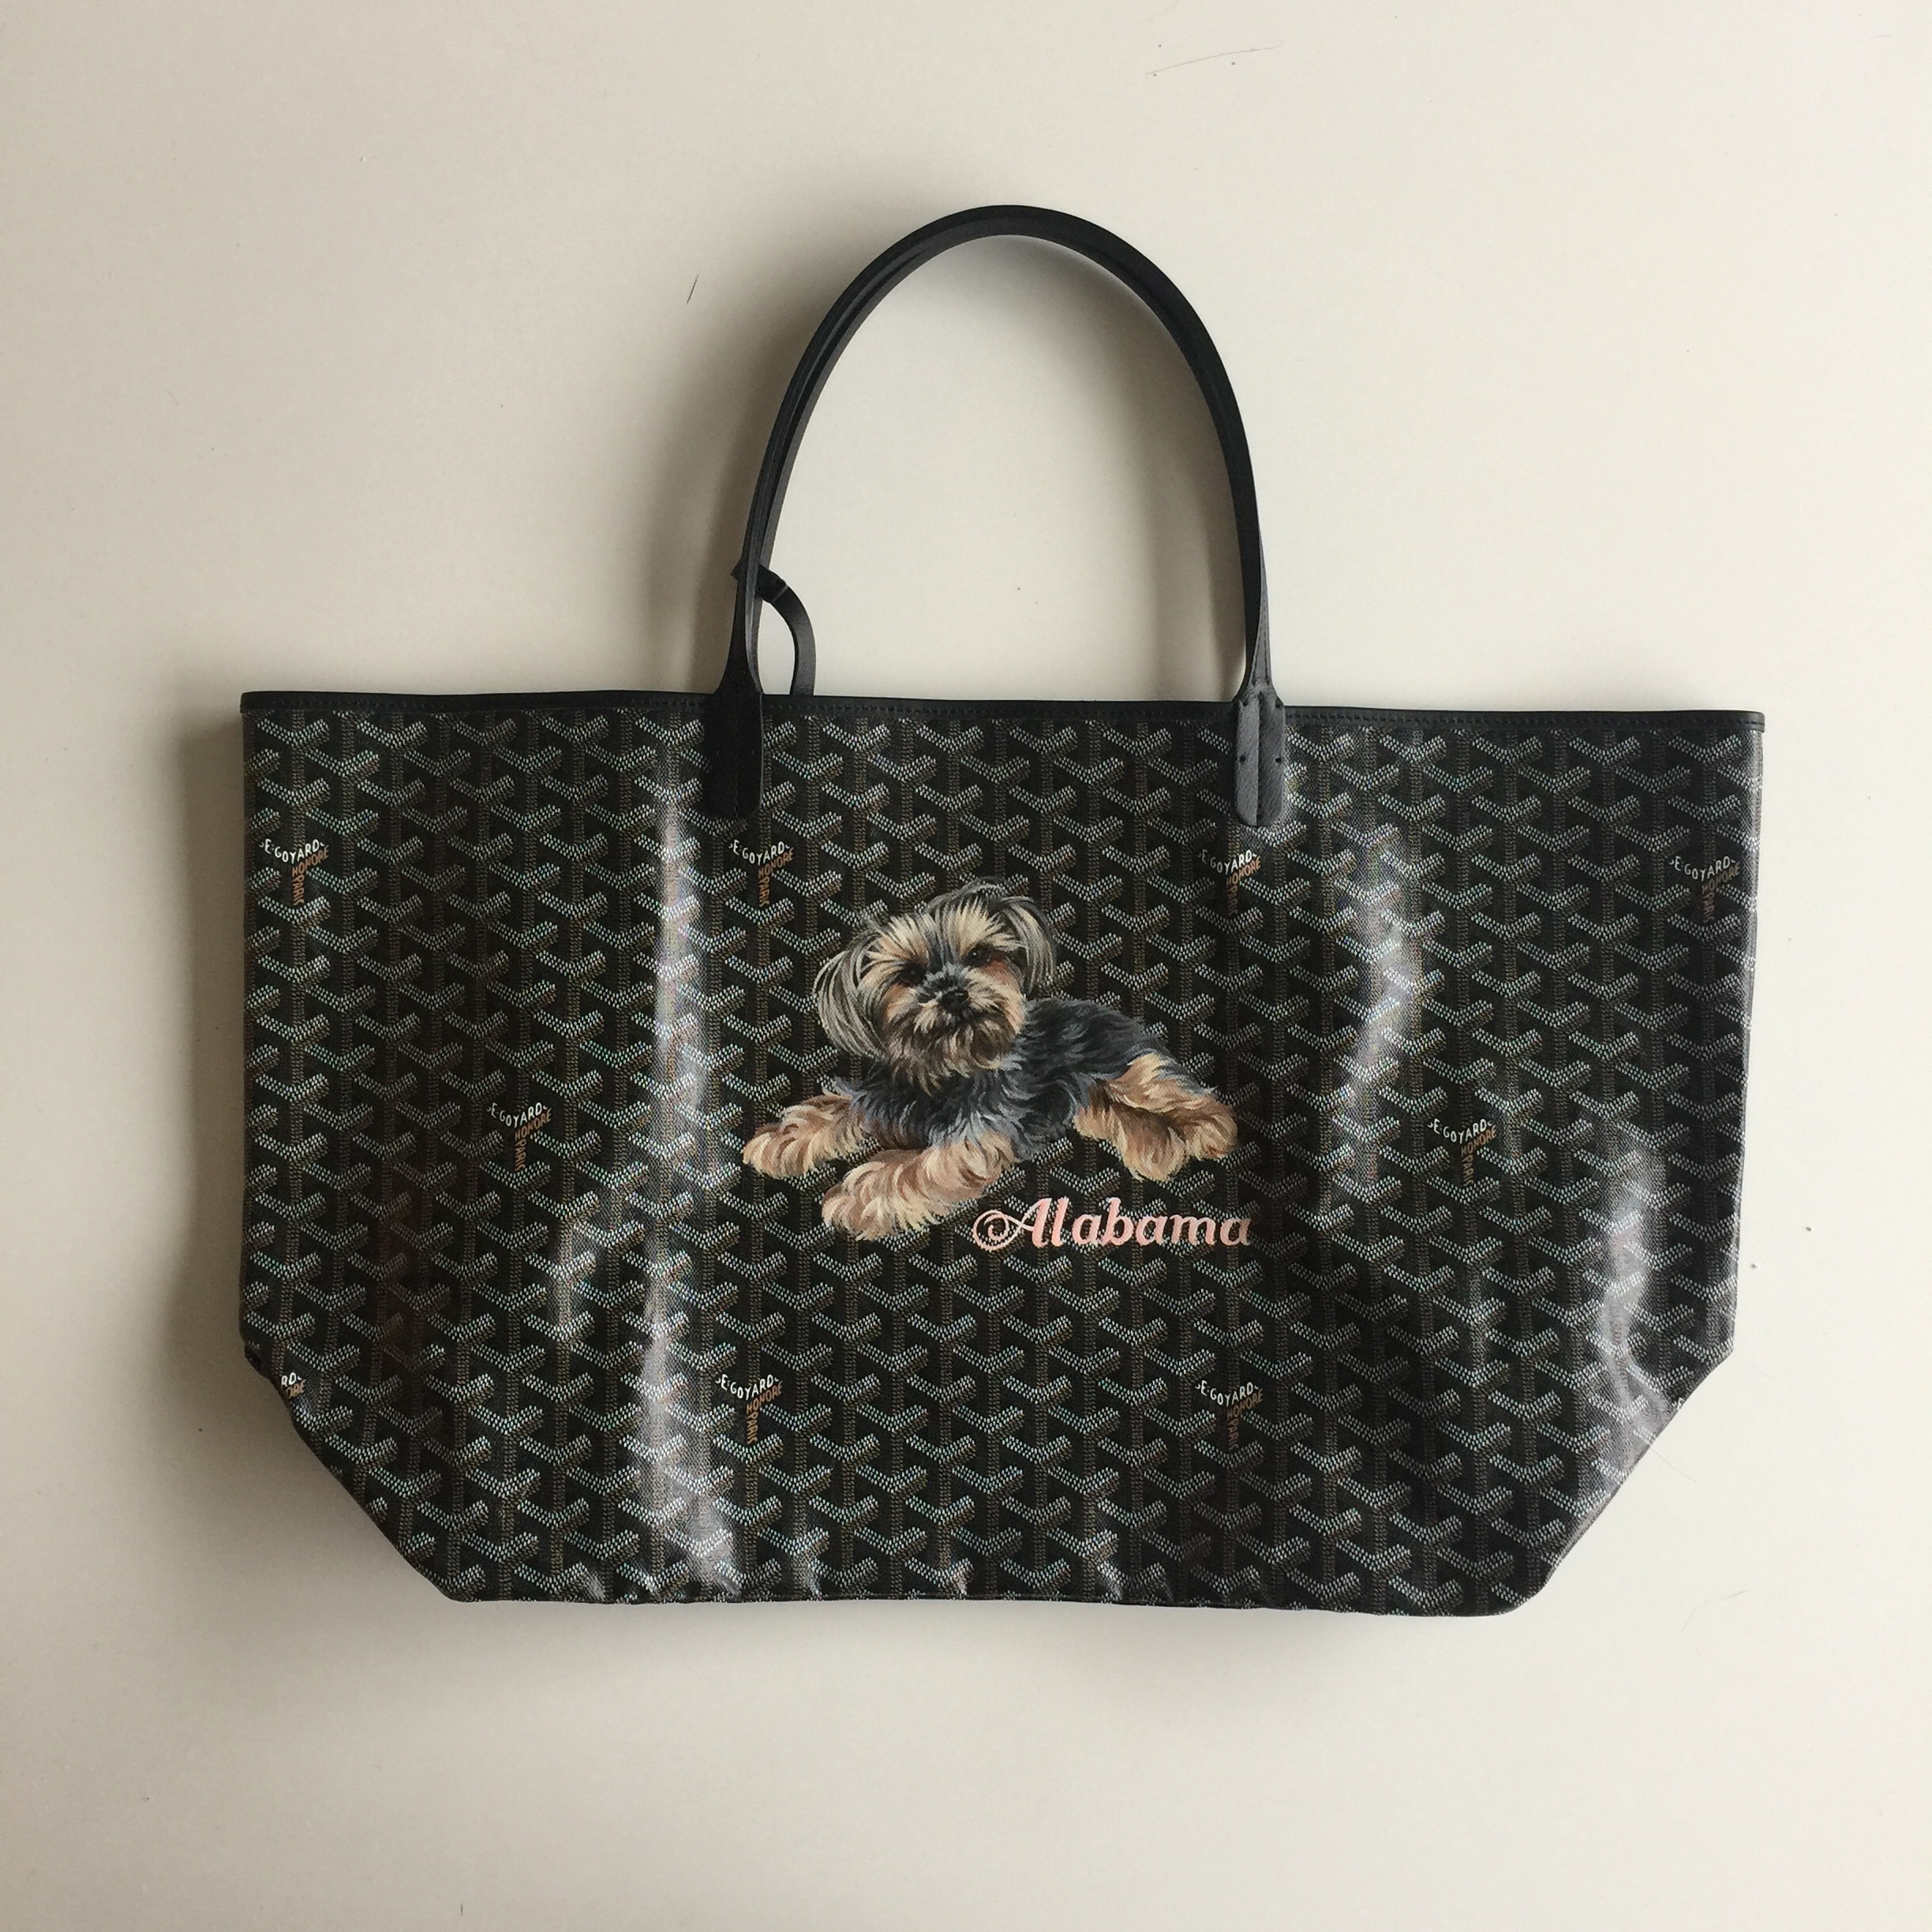 Alabama on a Goyard, commissioned by Leah and Dallas.